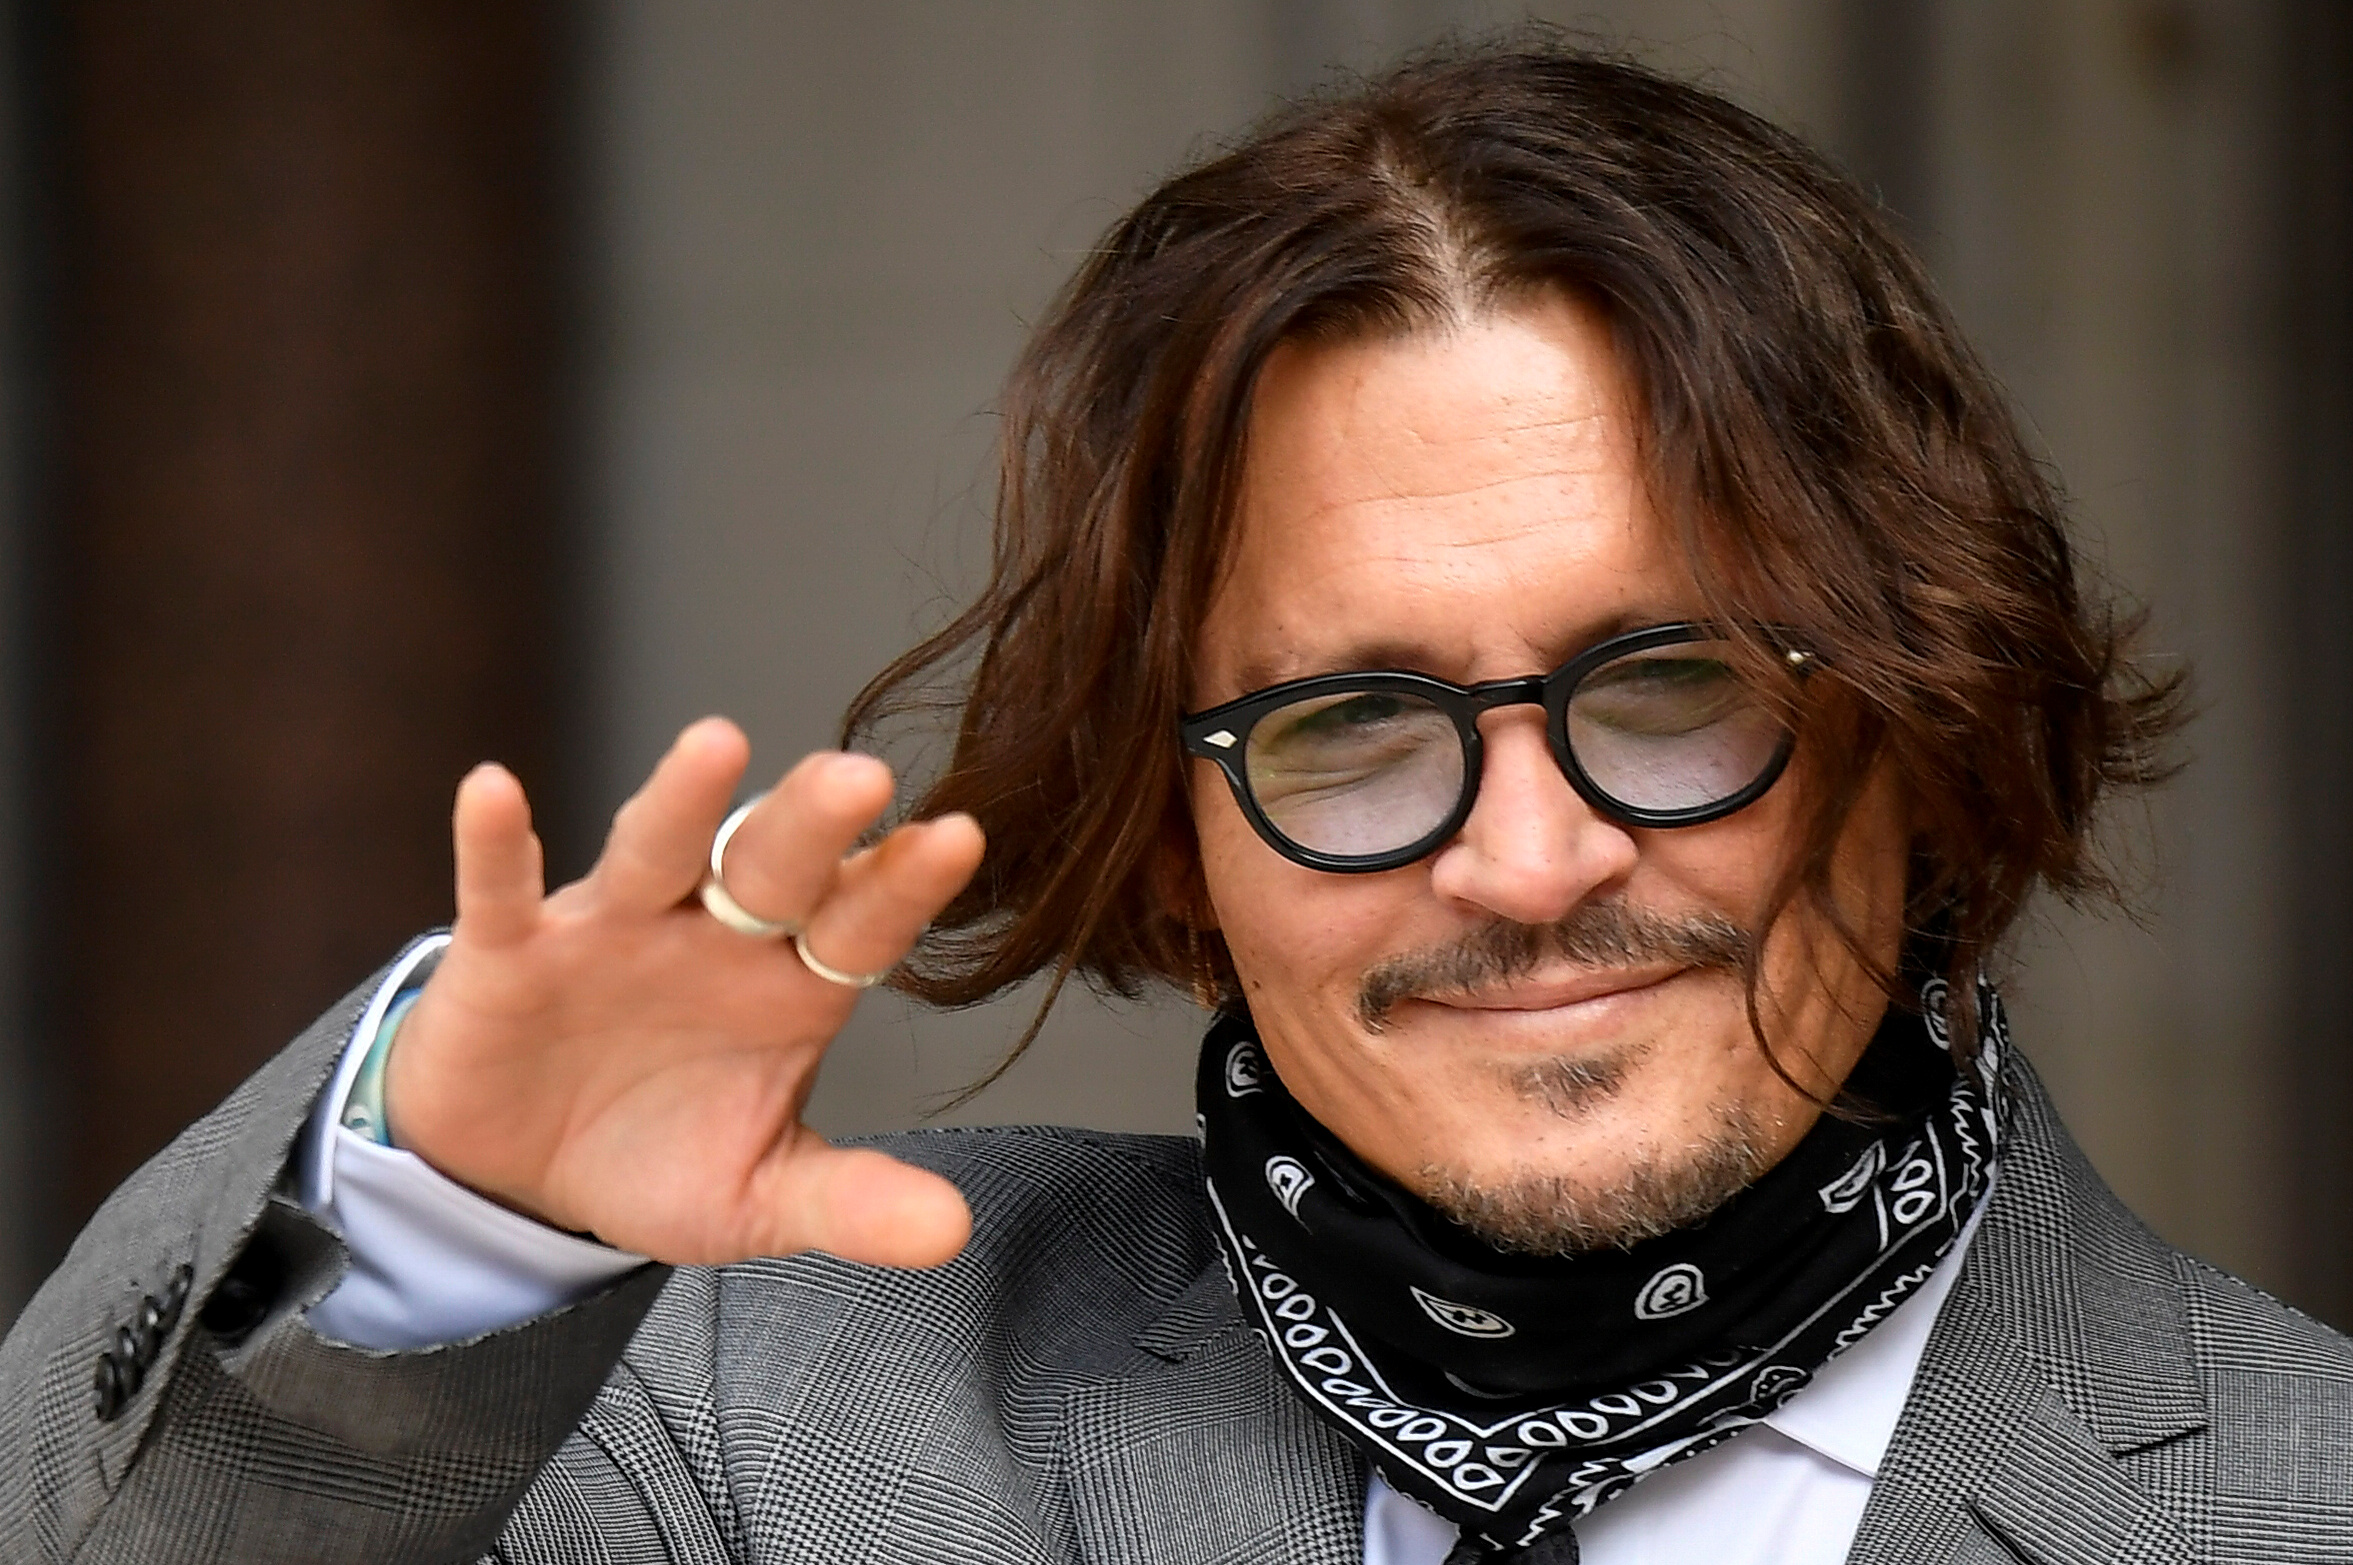 Actor Johnny Depp gestures as he arrives at the High Court in London, Britain July 13, 2020. REUTERS/Toby Melville